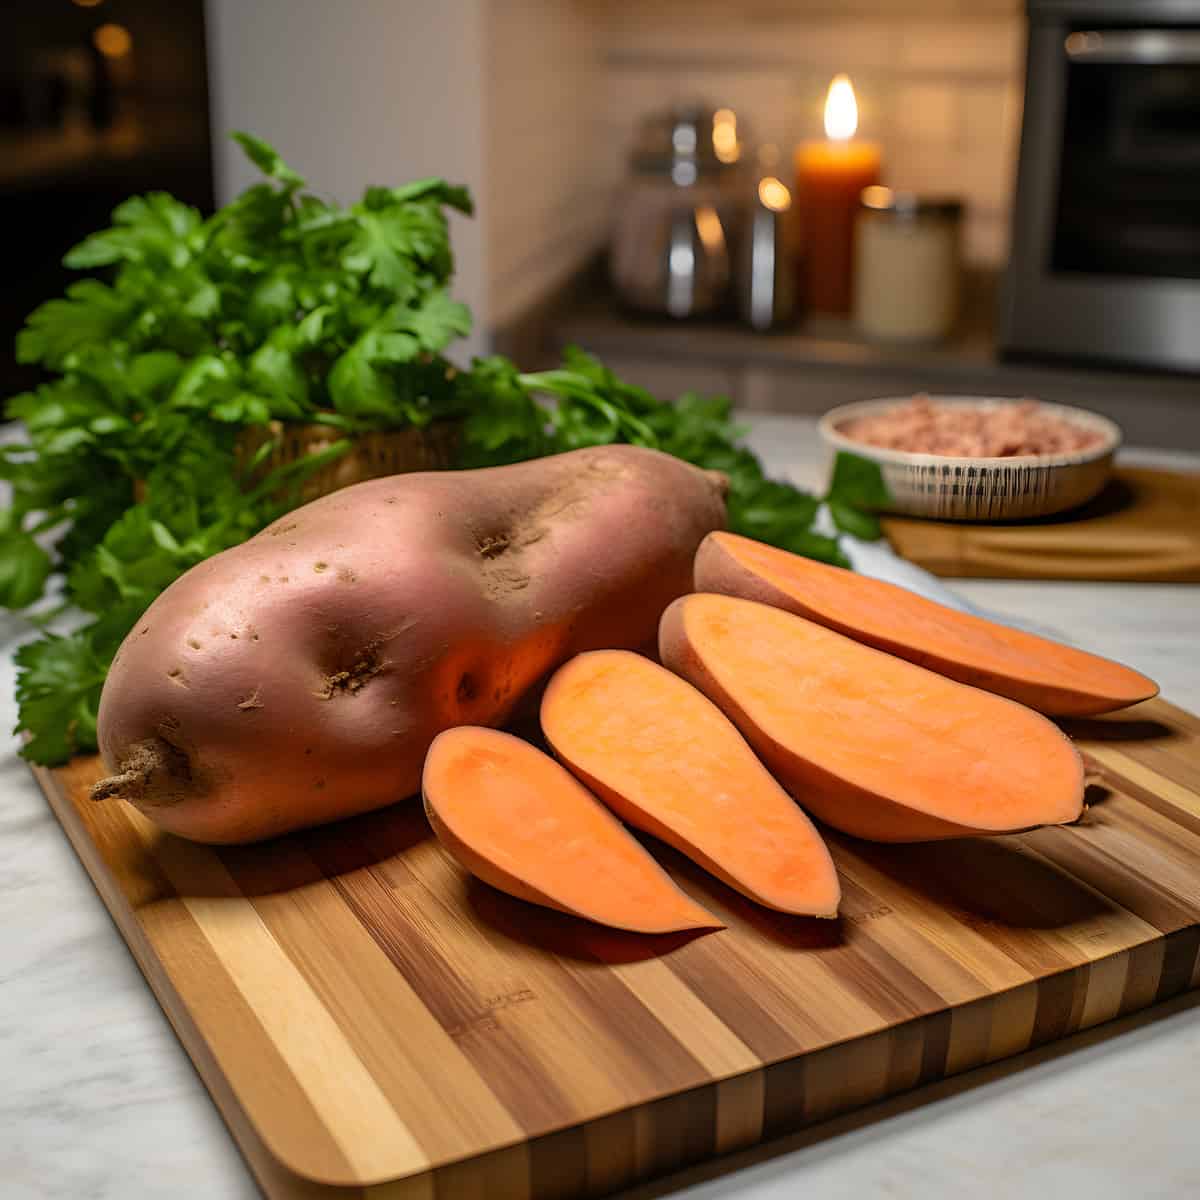 Redmar Or Md Sweet Potatoes on a kitchen counter